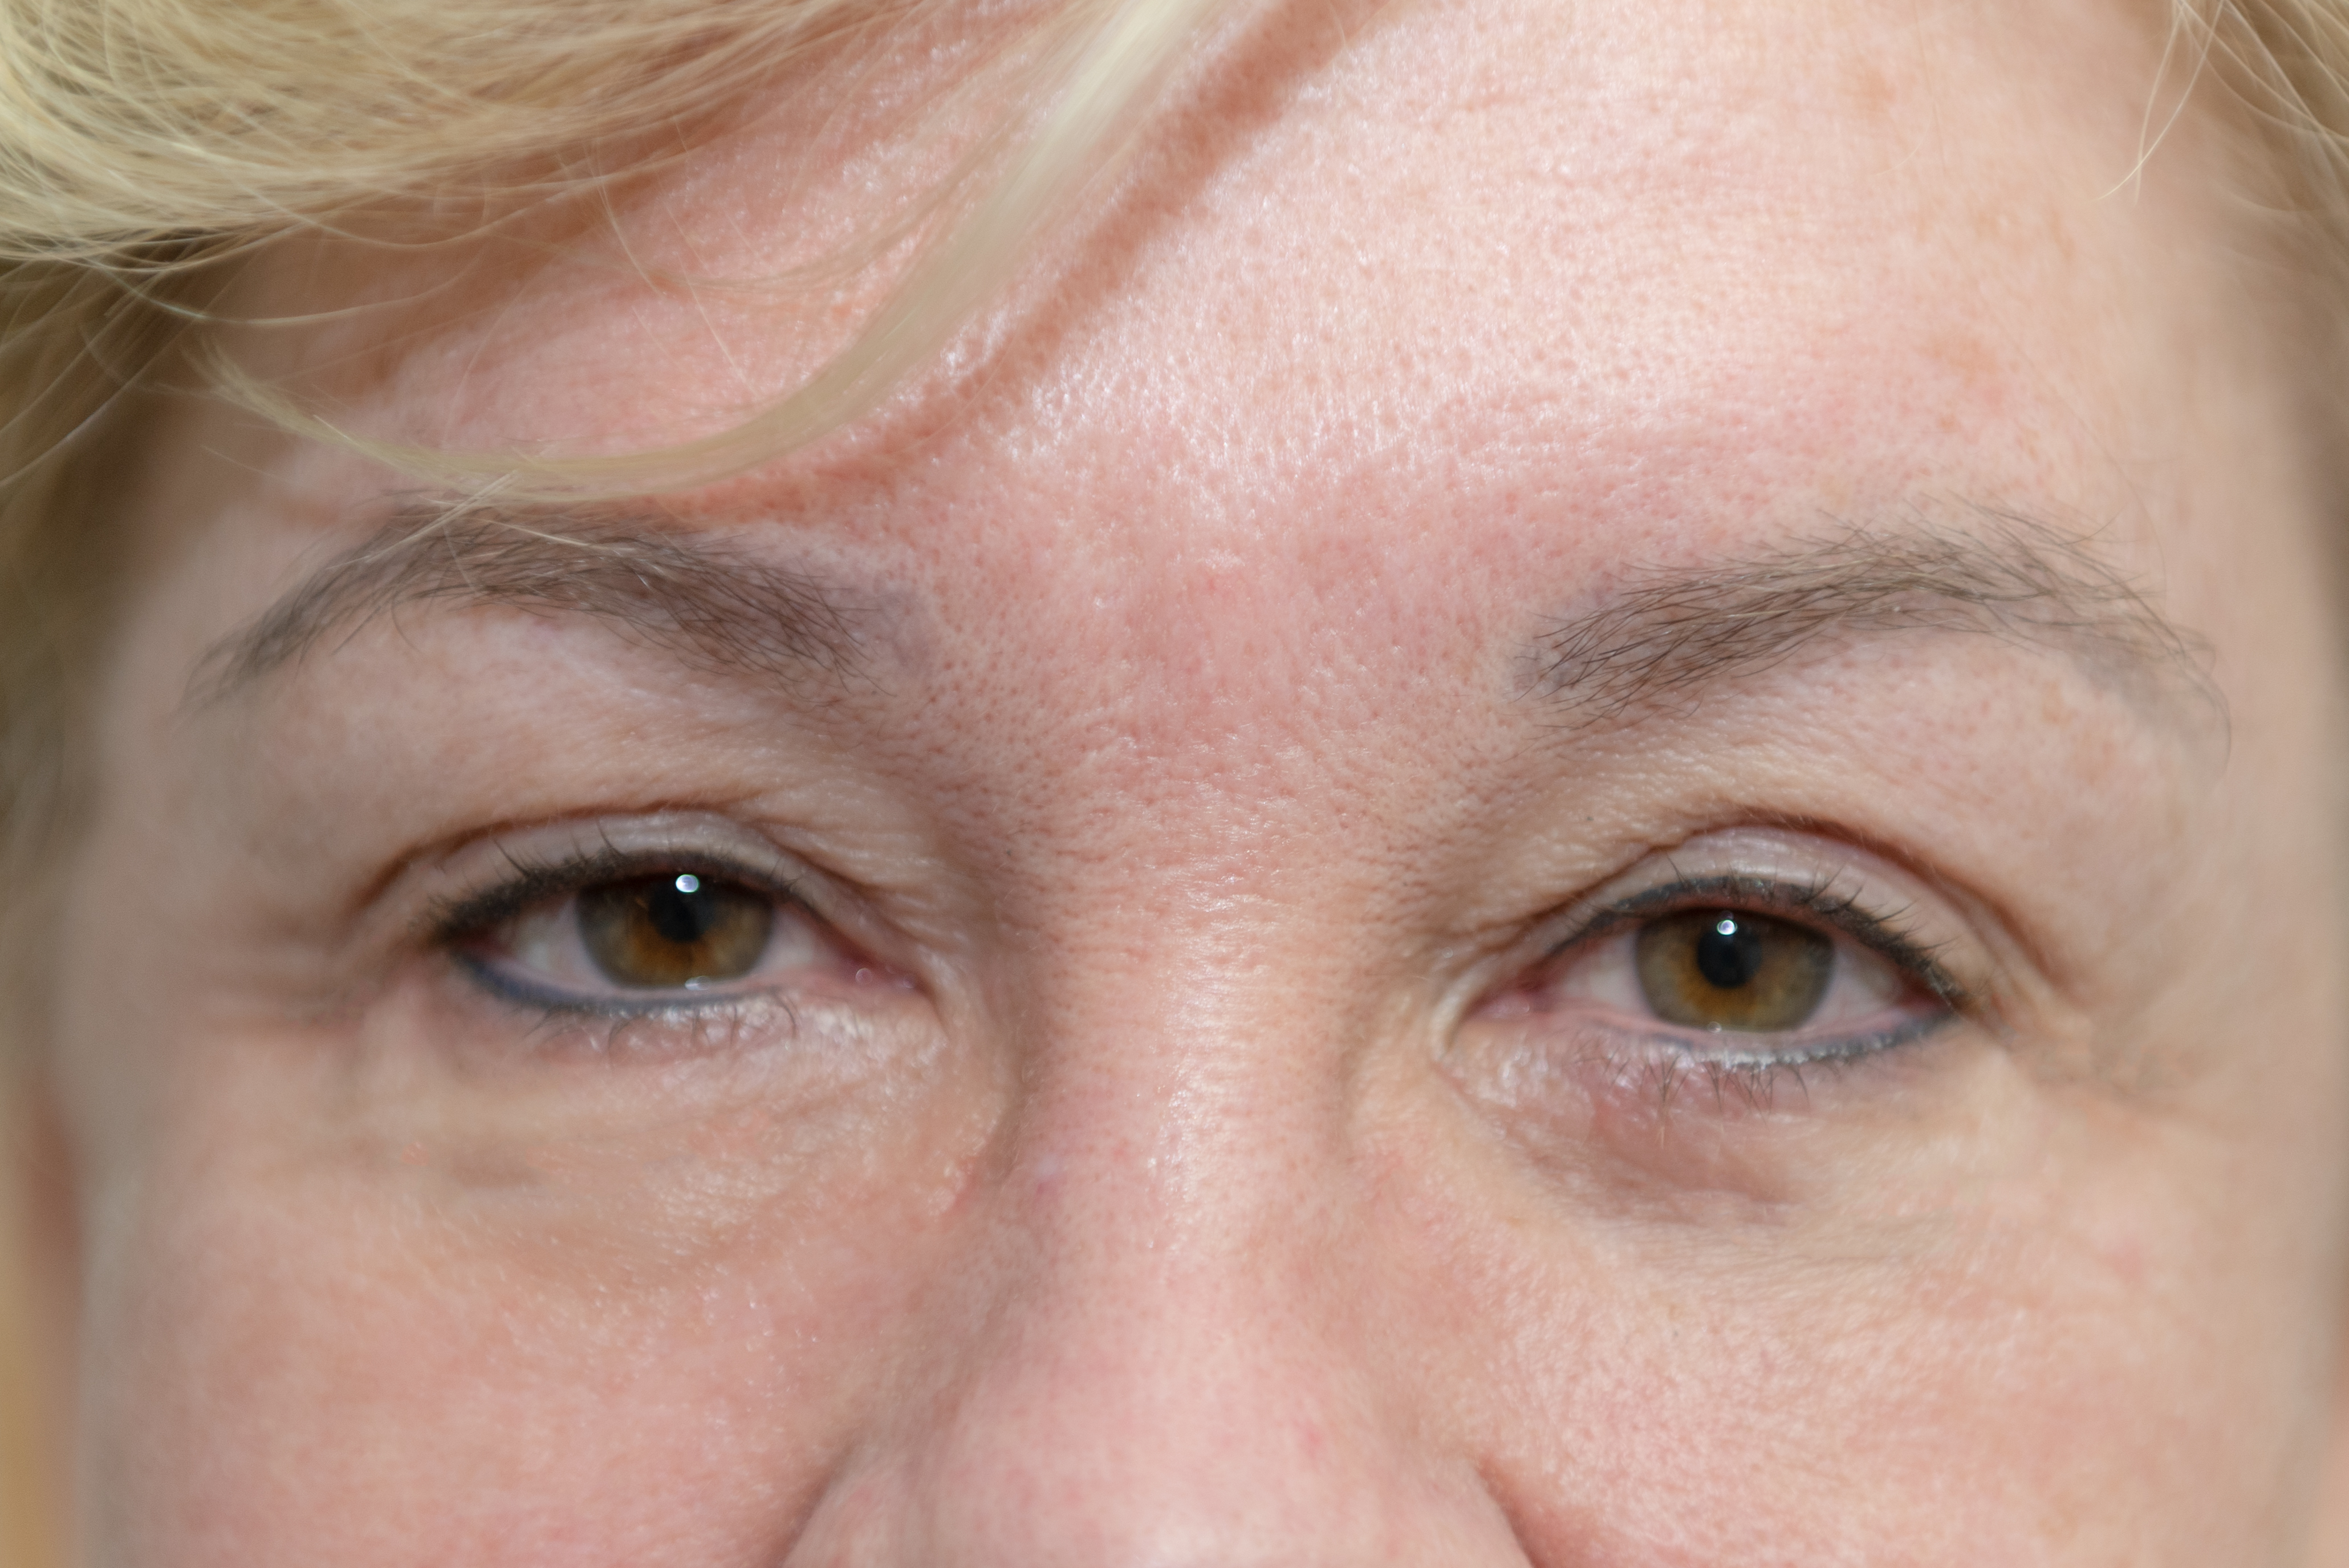 After: Tattooing inside the mucosa, (wet line) camouflages the redness and eyes look bright and healthy.